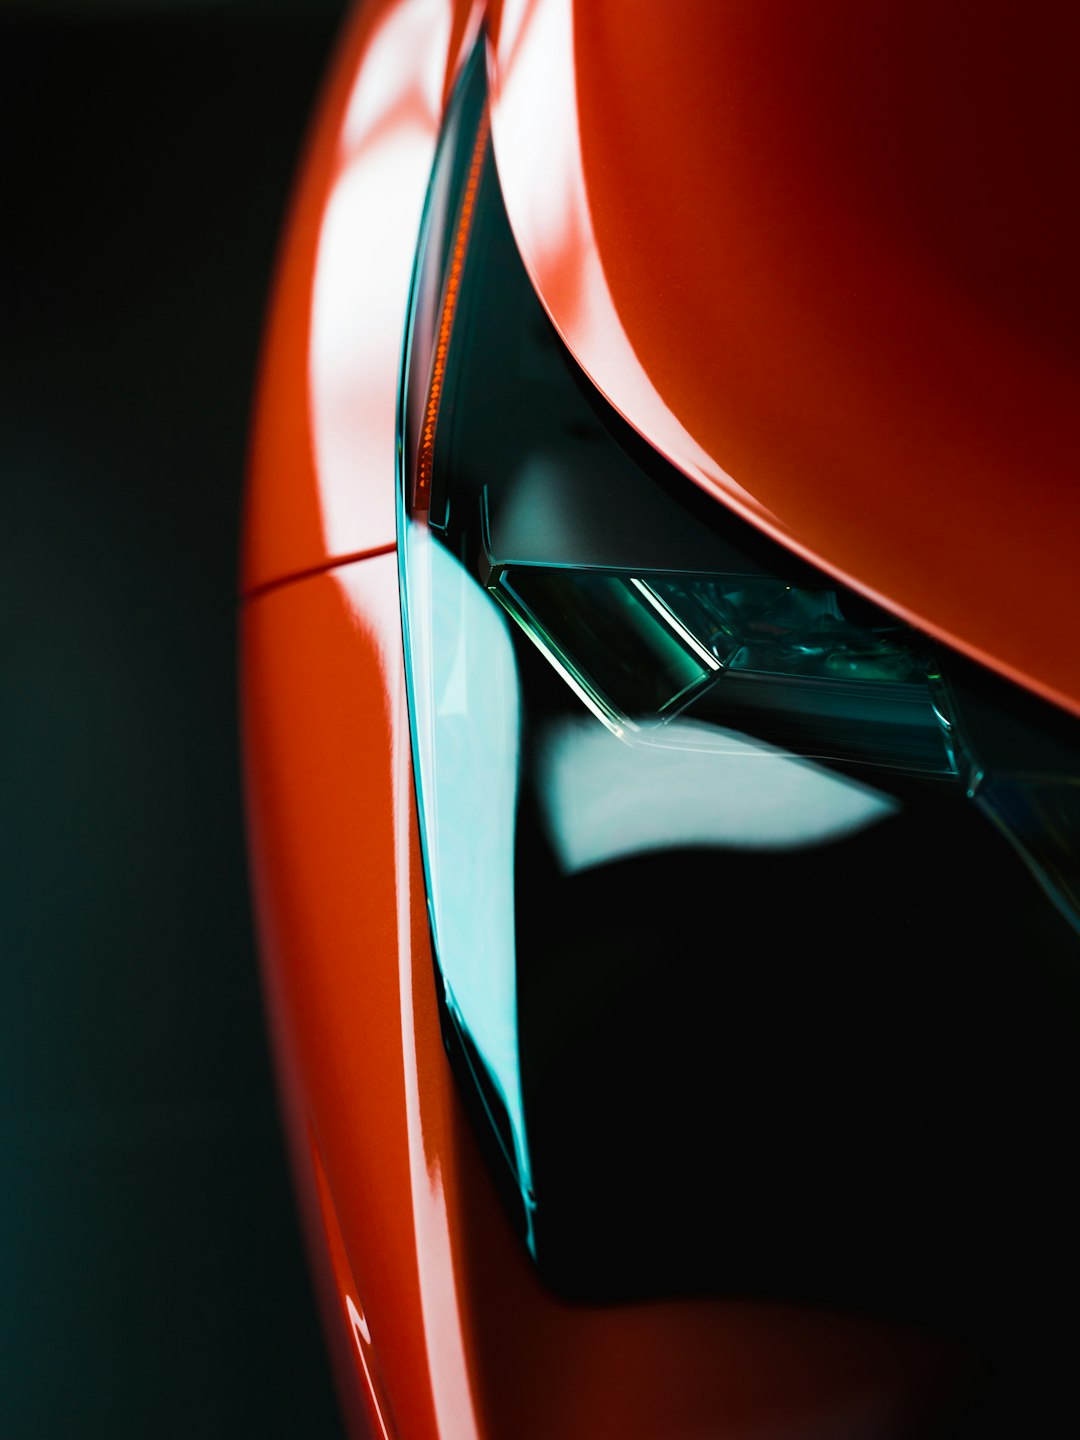 Lexus NX studio shot / 2017 Like my photographs and want to see more at Unsplash? Support me at http://artlasovsky.com/unsplash